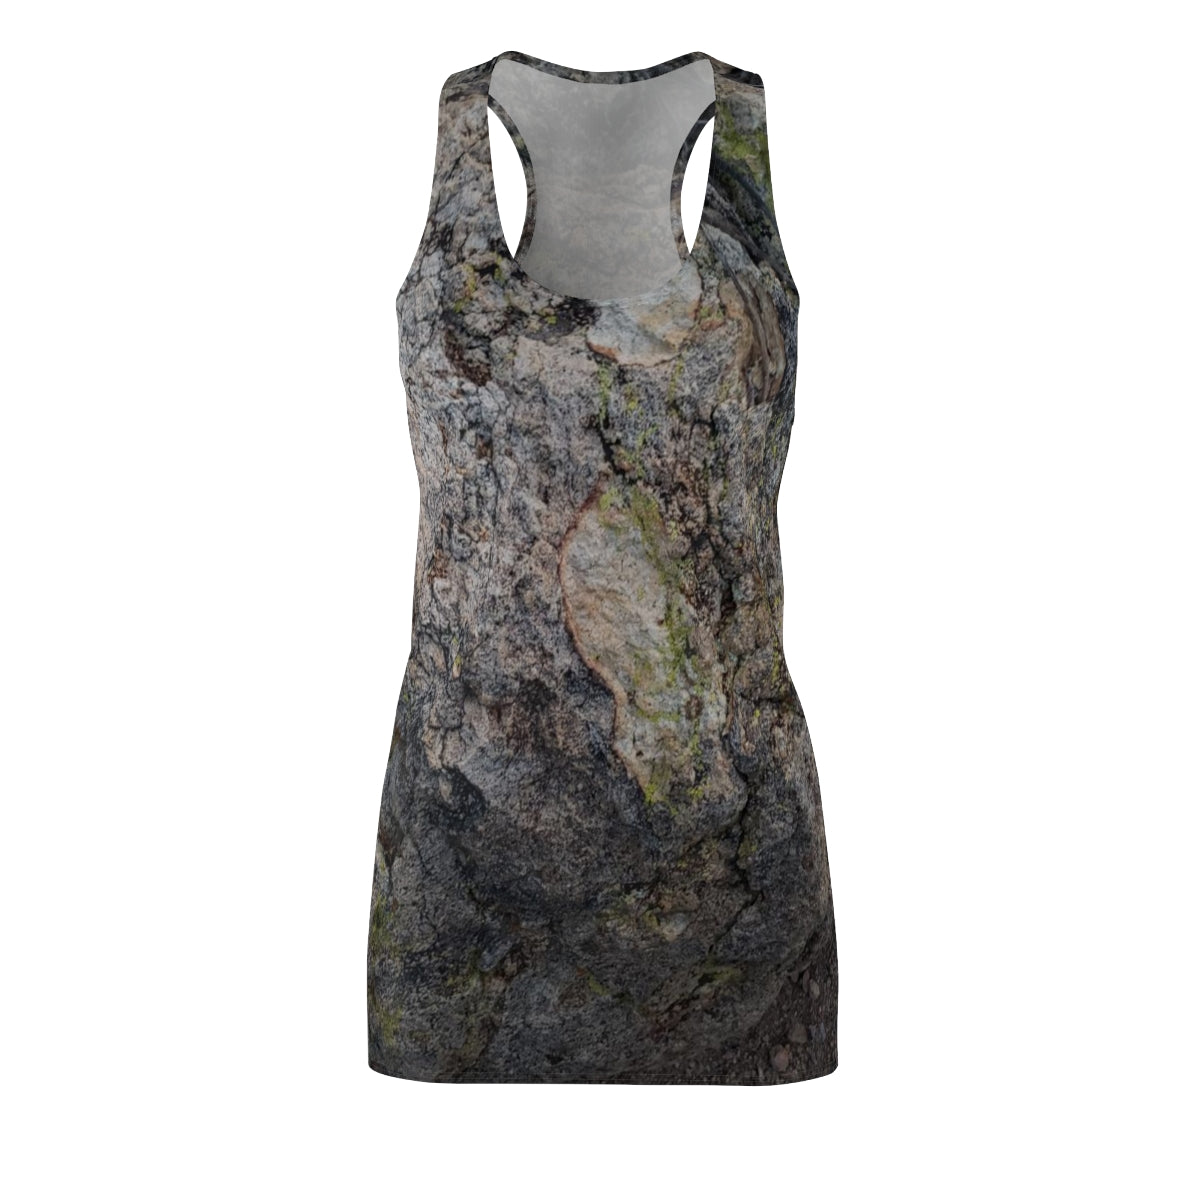 front view of the Rock racerback dress